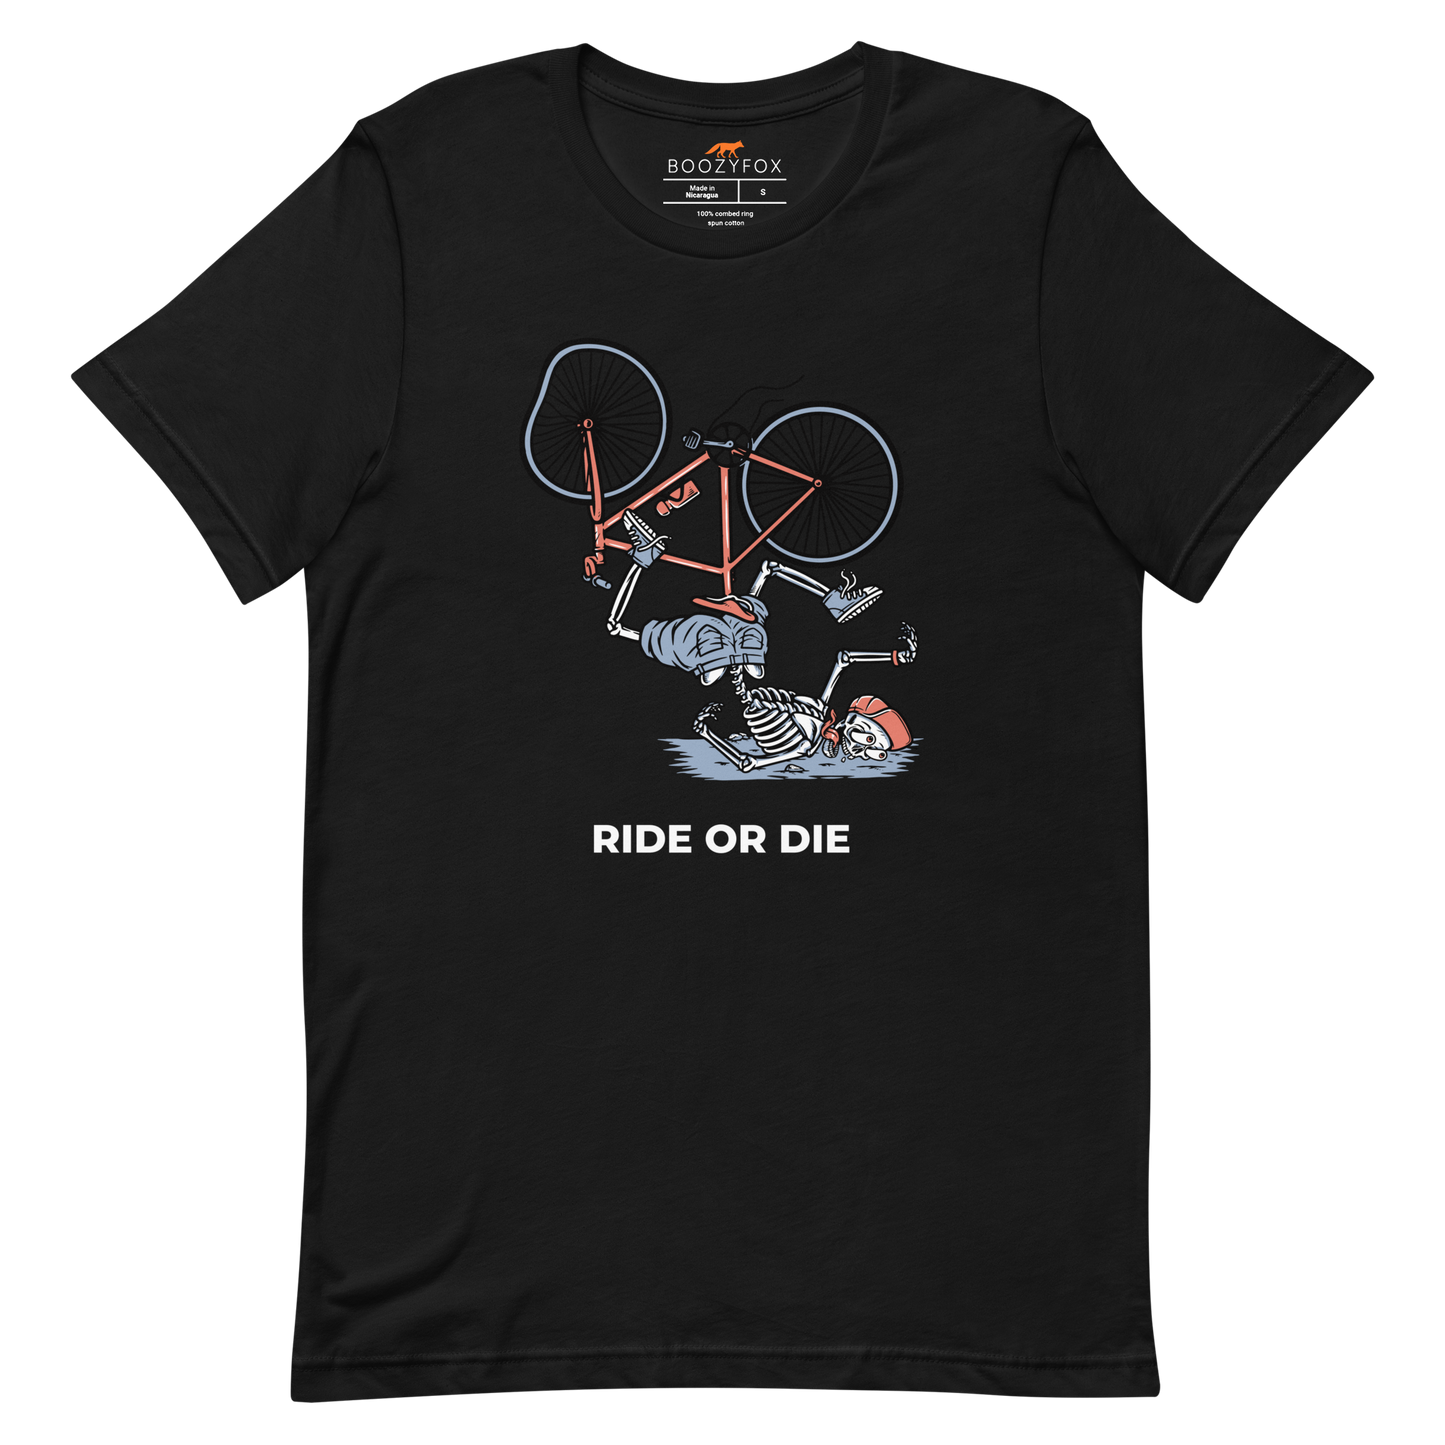 Black Premium Ride or Die Tee featuring a bold Skeleton Falling While Riding a Bicycle graphic on the chest - Funny Graphic Skeleton Tees - Boozy Fox